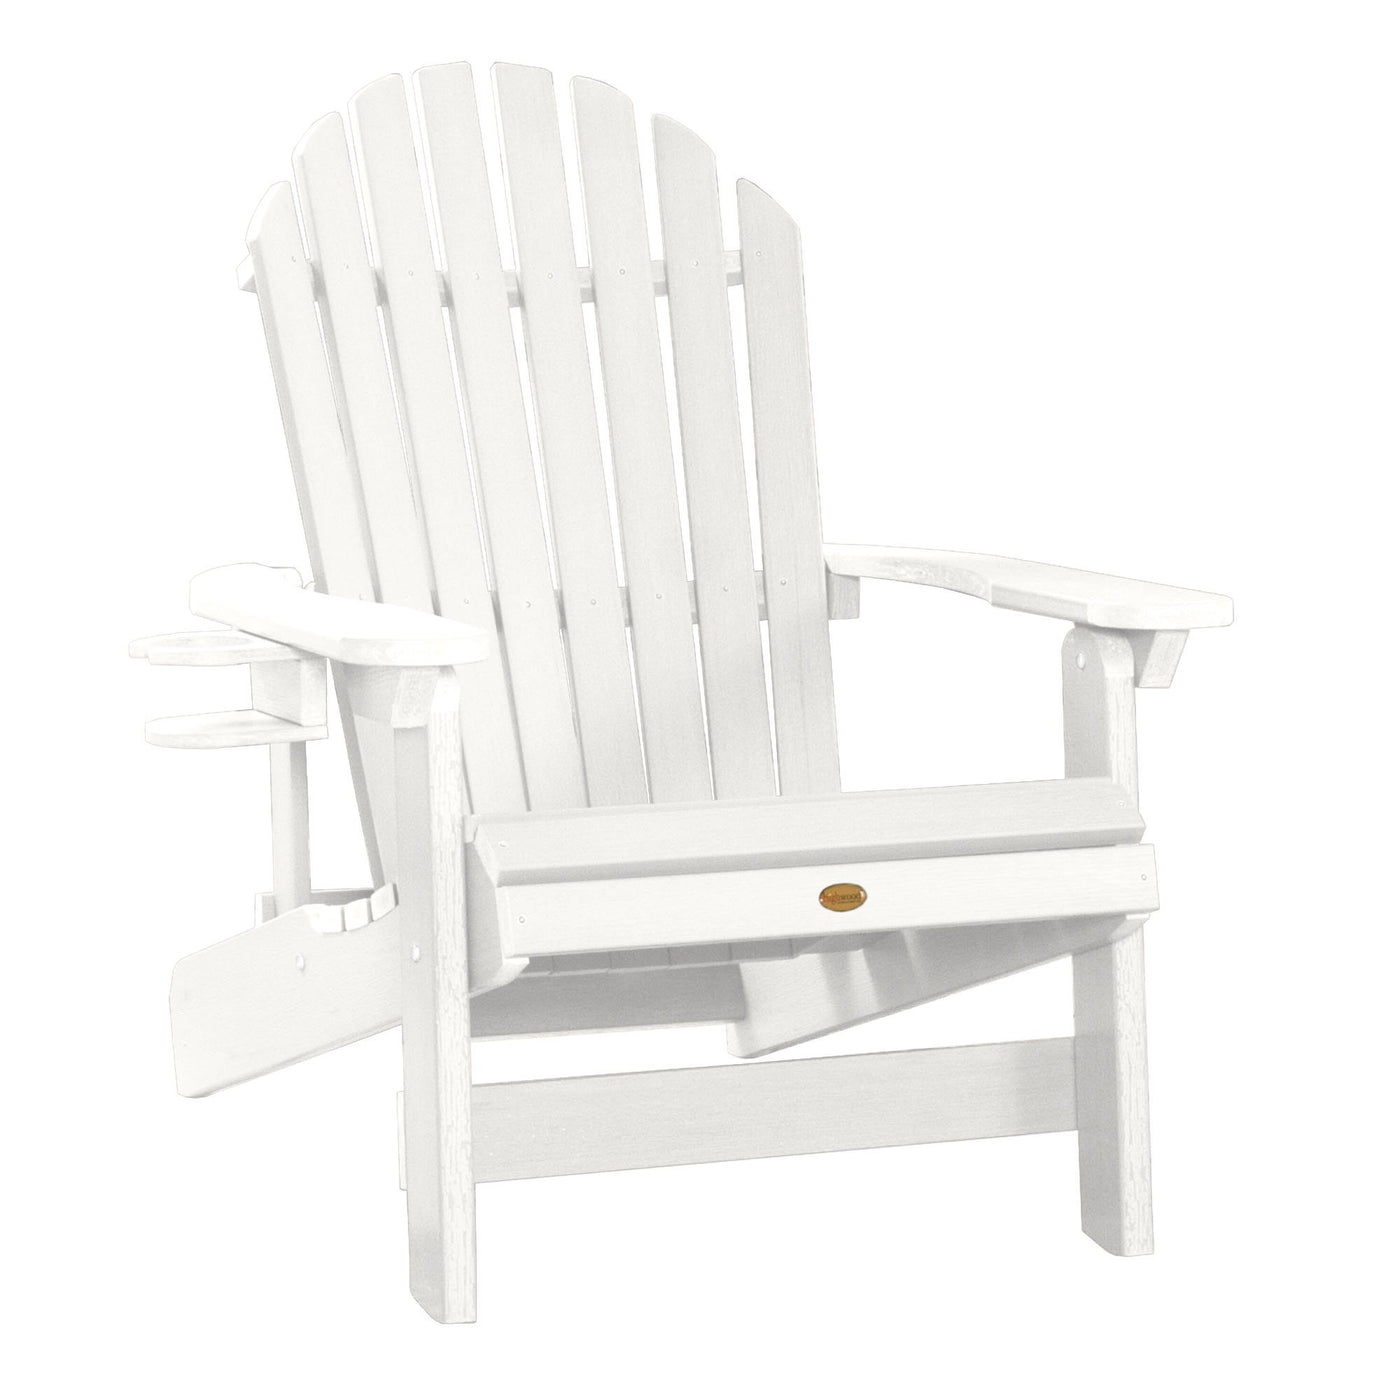 1 King Hamilton Folding and Reclining Adirondack Chair with 1 Easy-add Cup Holder Highwood USA White 